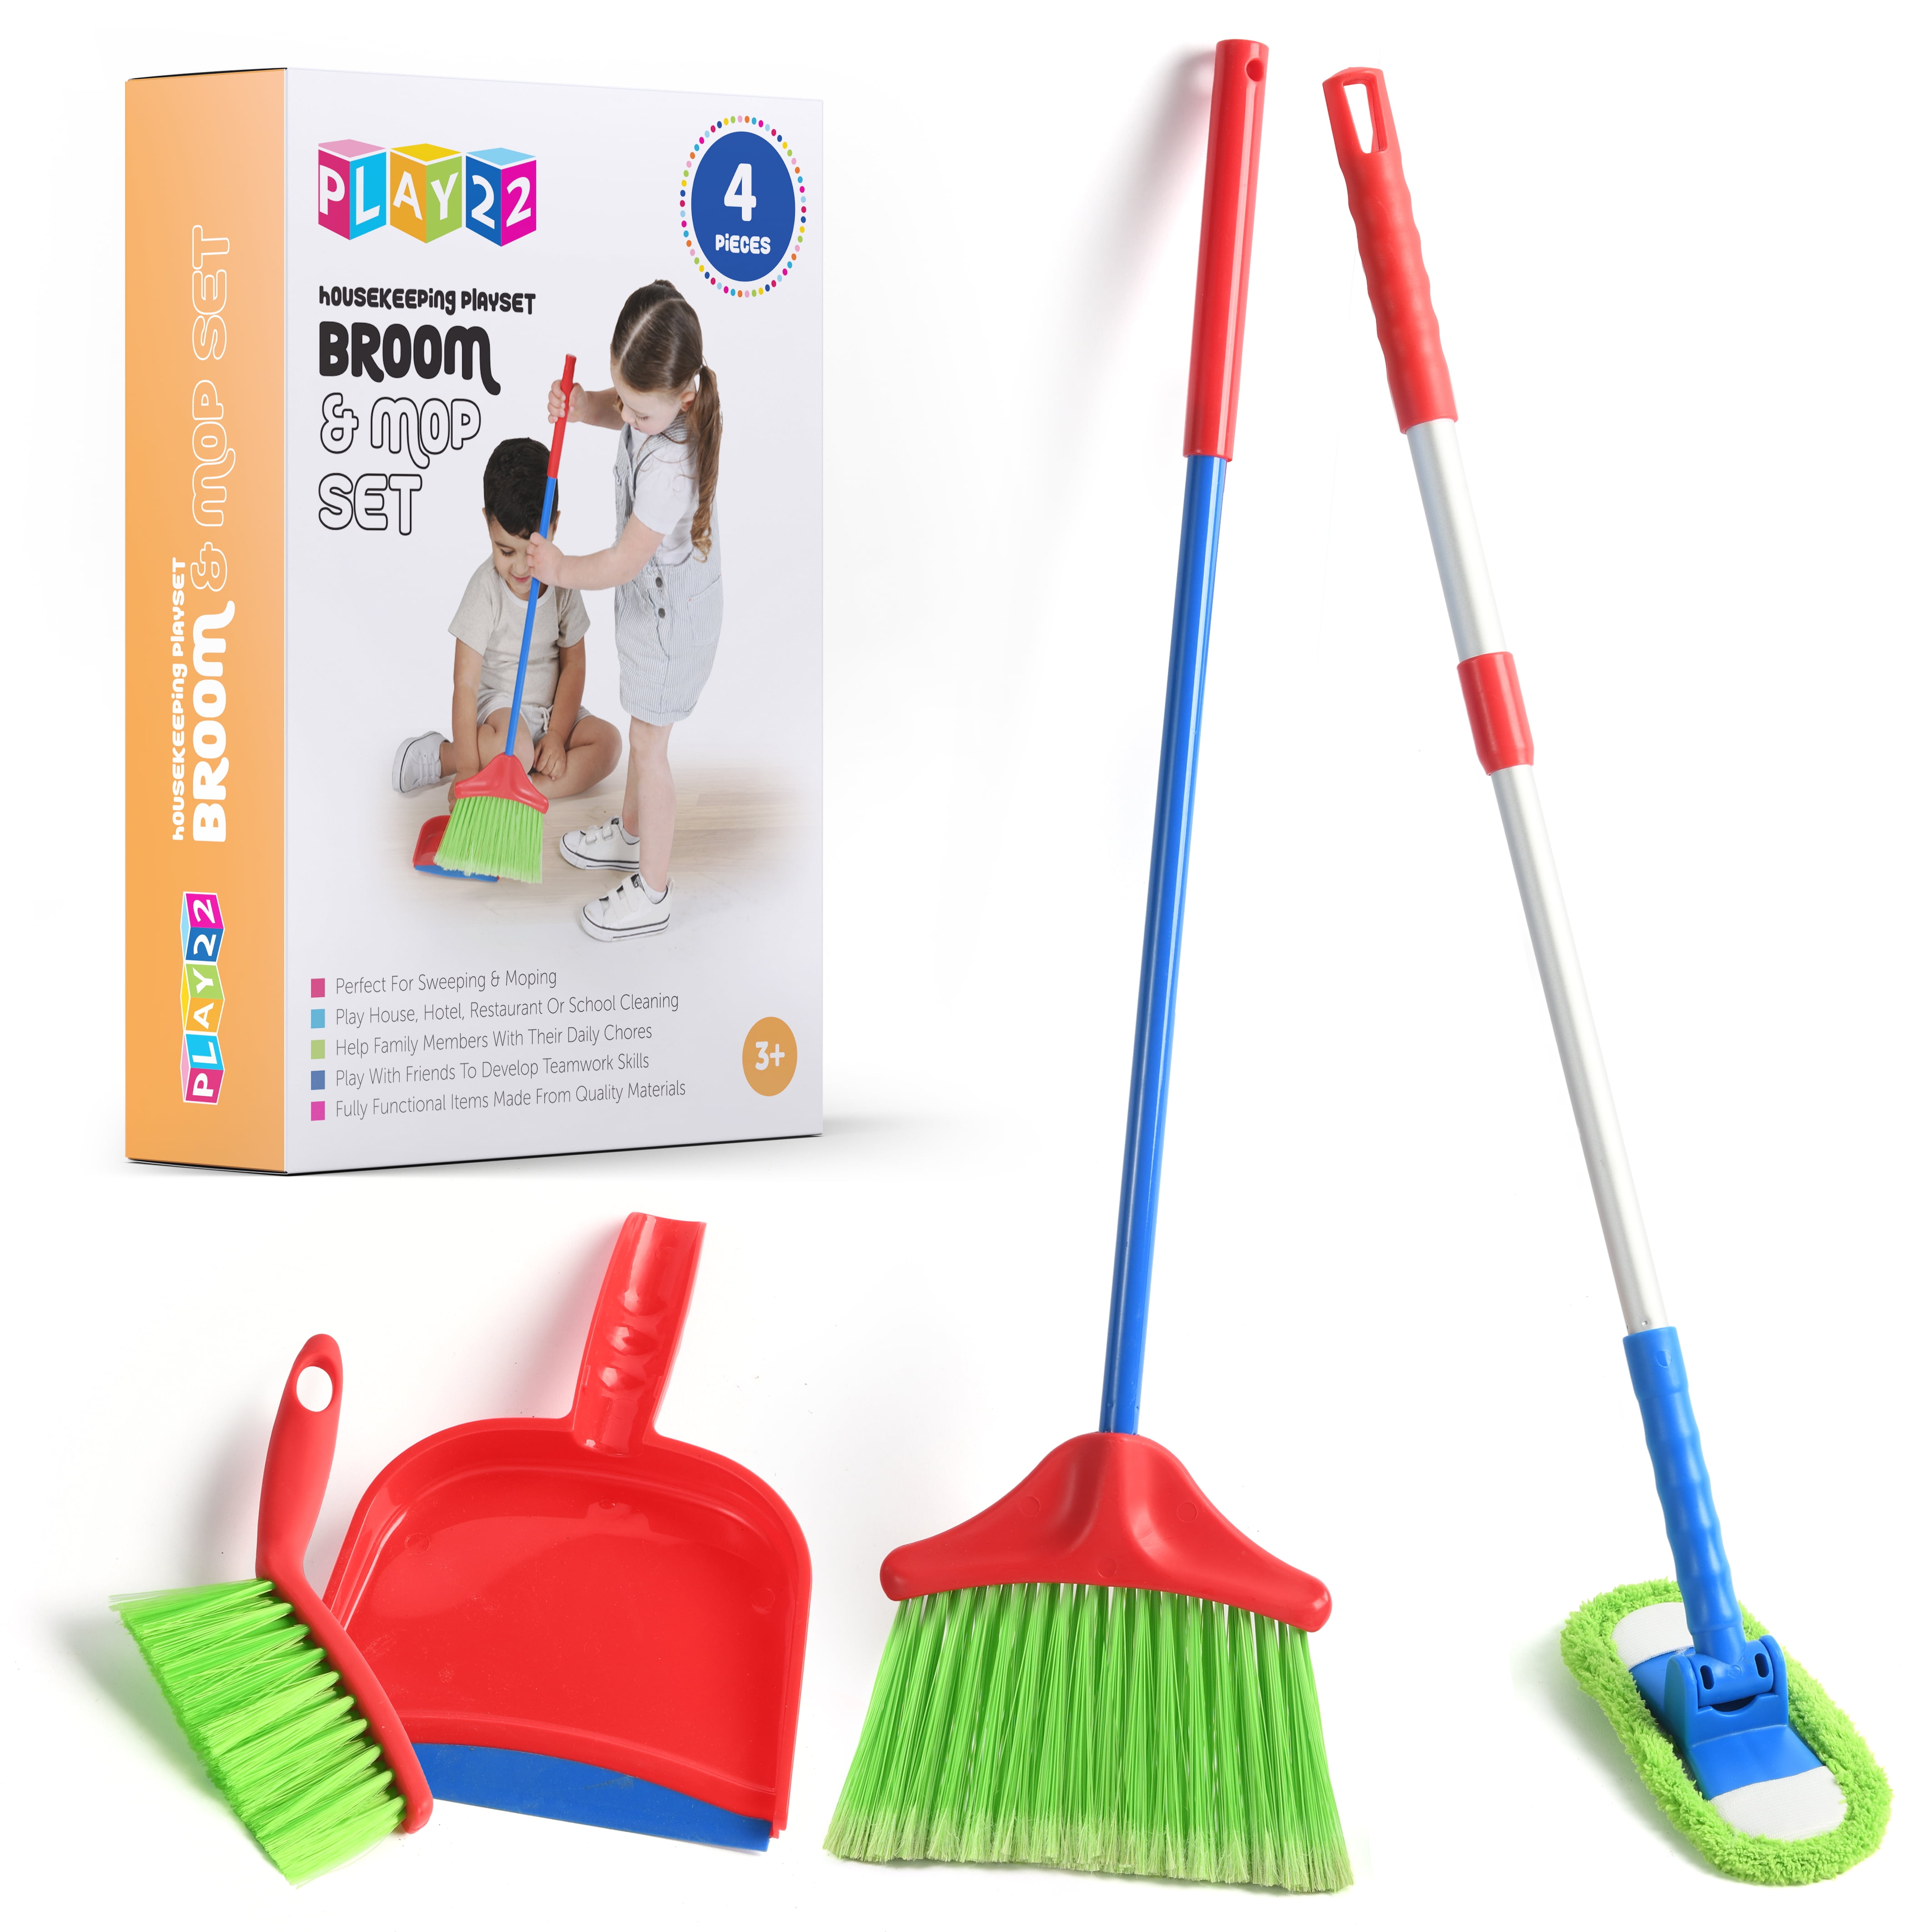 Kids Cleaning Set for Toddlers, Pretend Play Housekeeping Supplies Kit for  Boys and Girls Complete with Broom, Mop, Dust Pan, Spray Bottle and More